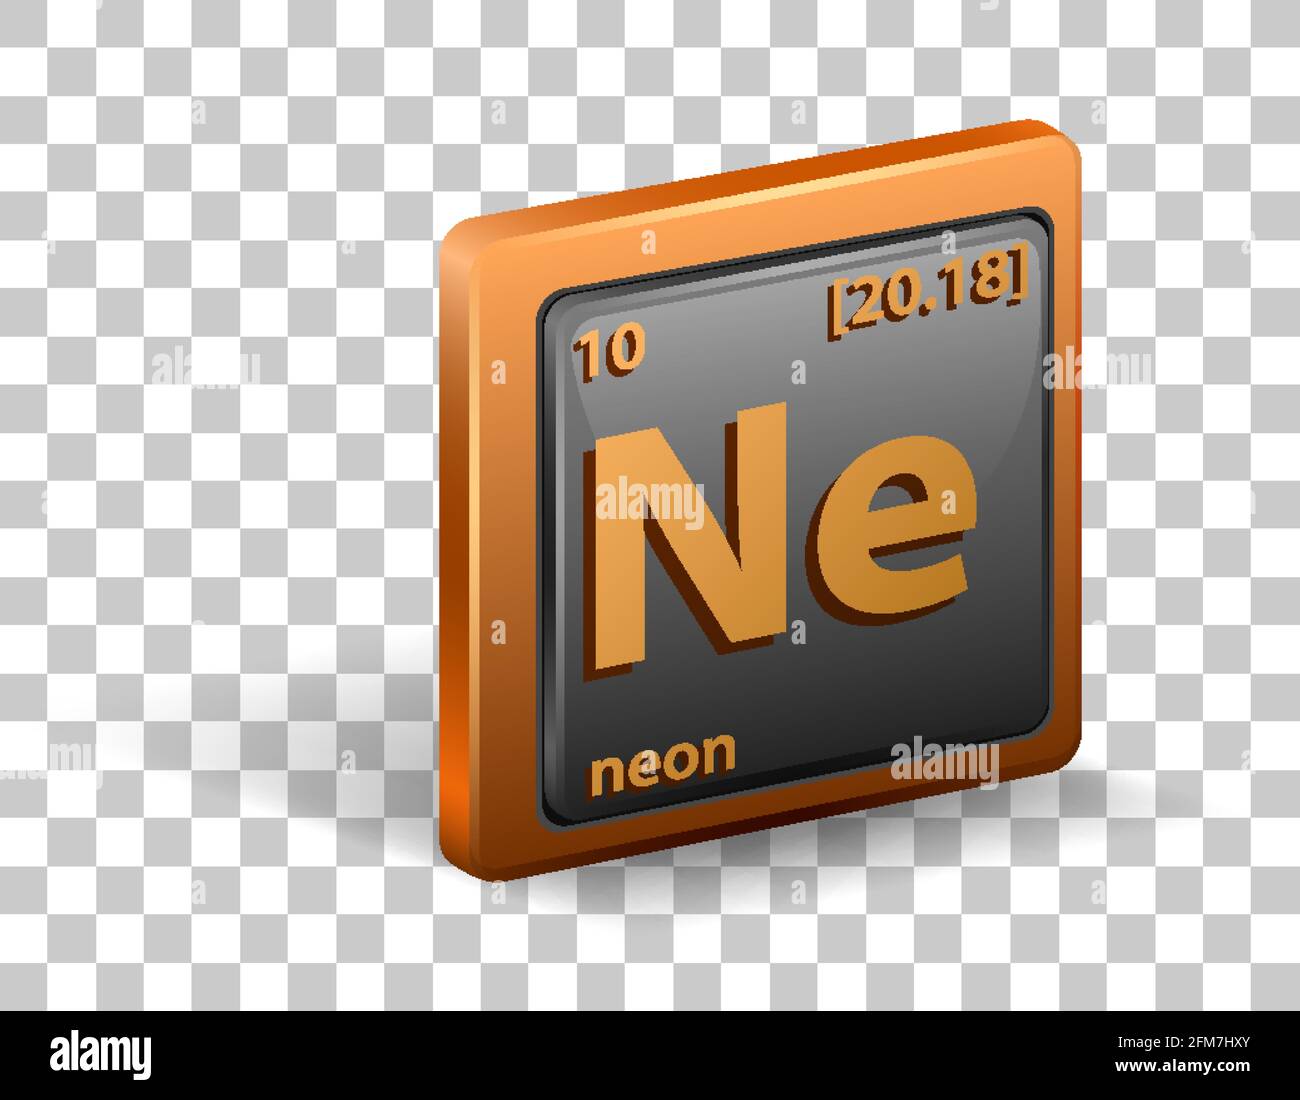 Neon chemical element. Chemical symbol with atomic number and atomic mass. illustration Stock Vector